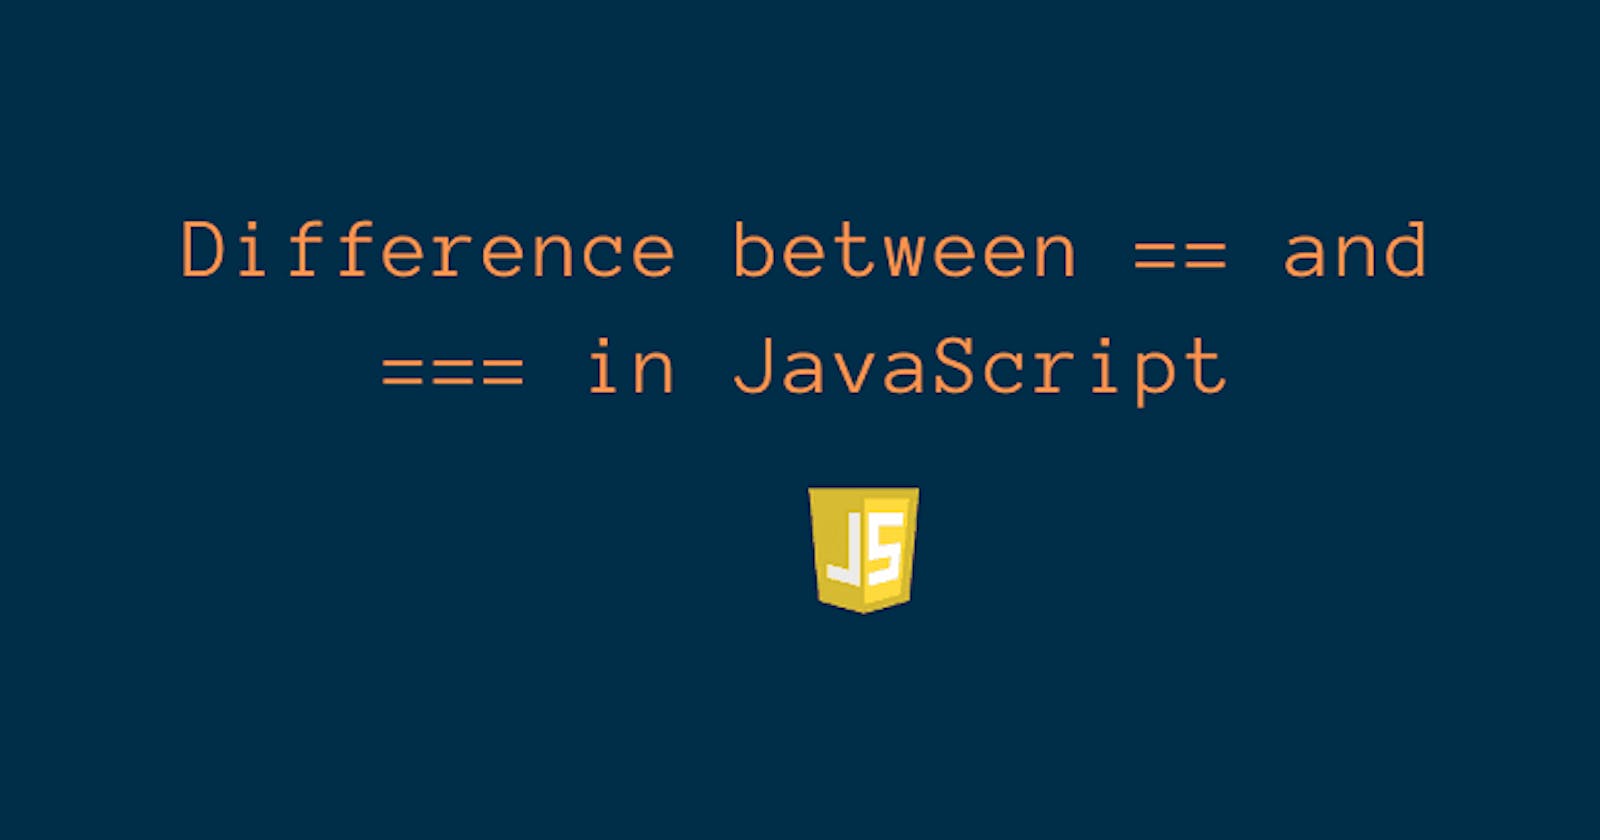 Difference between '==' and '===' in JavaScript.